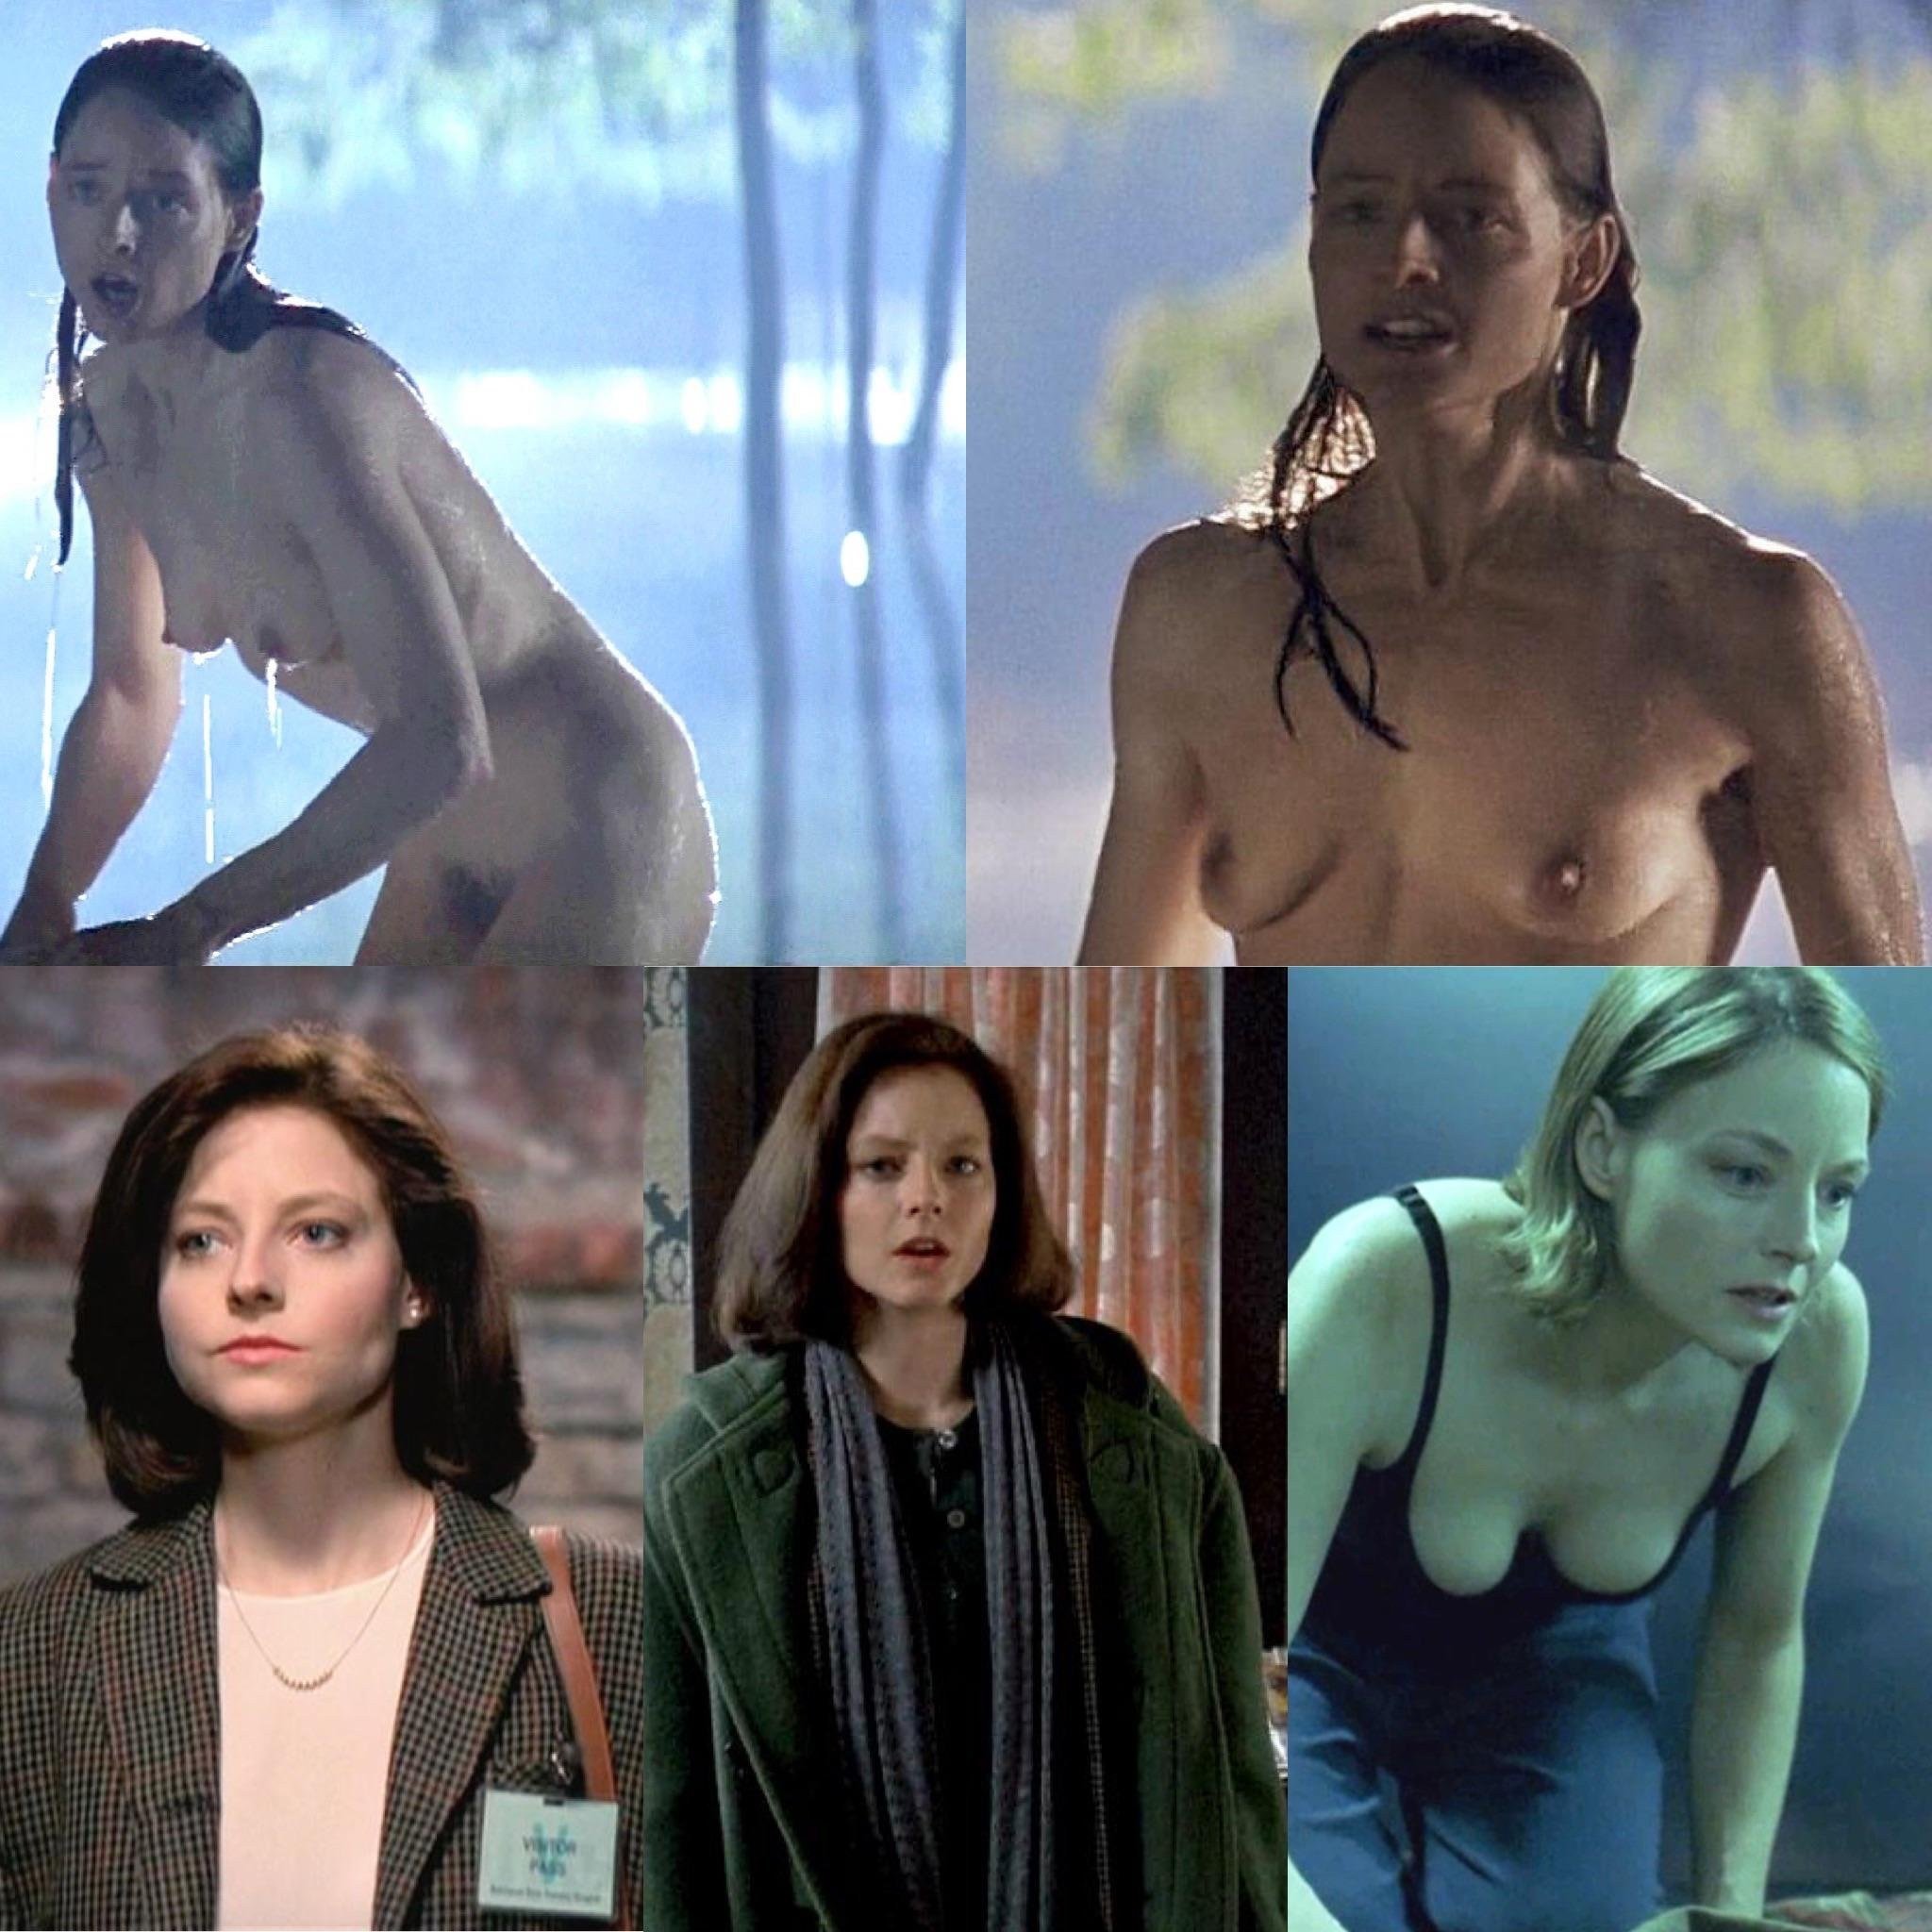 Best of Jodie foster naked pictures